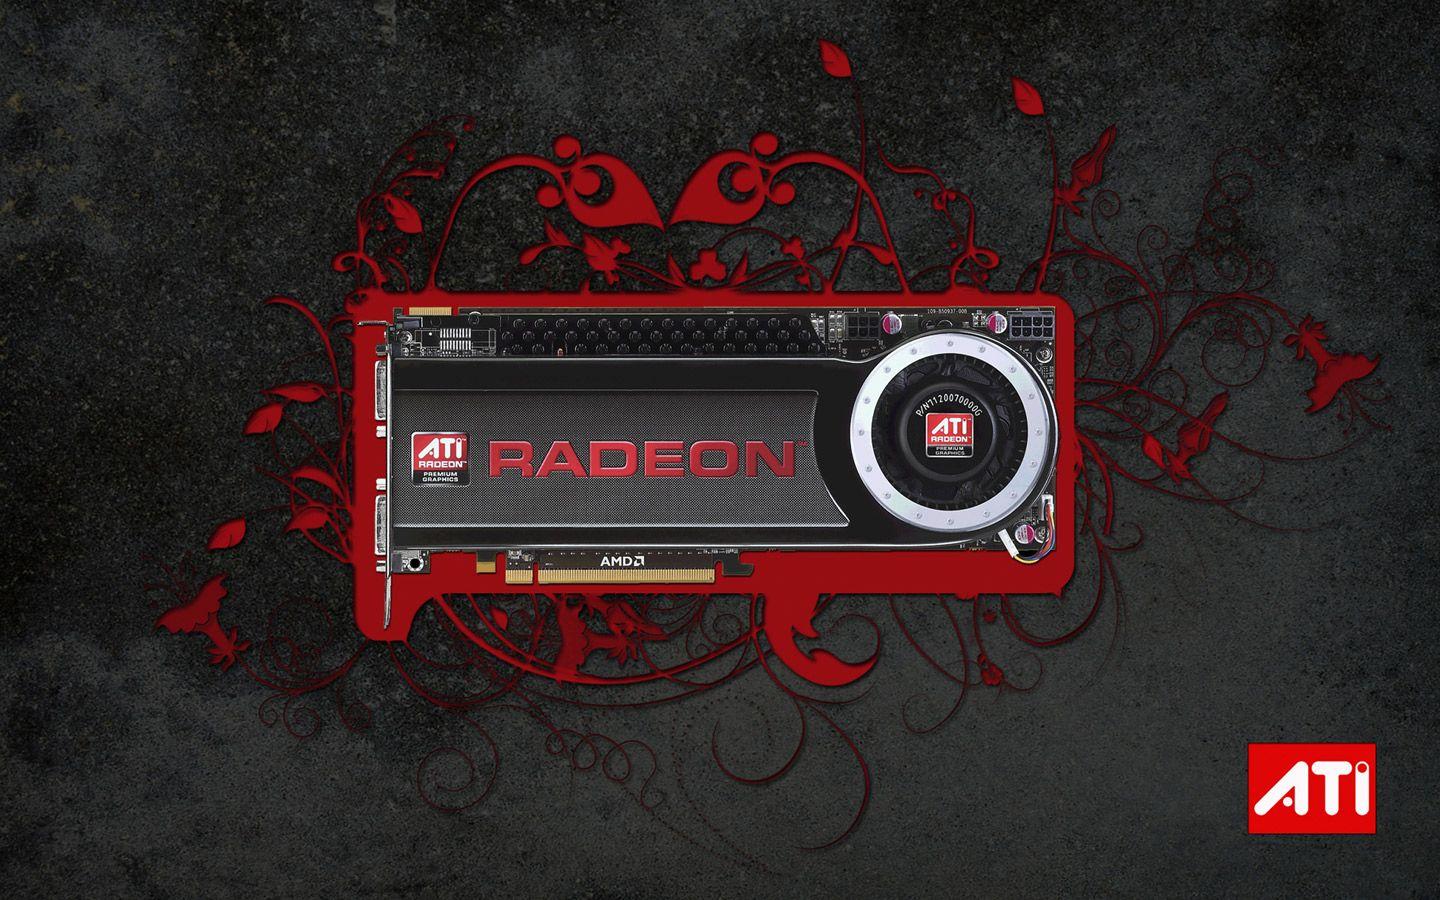 looking for some slick AMD wallpaper